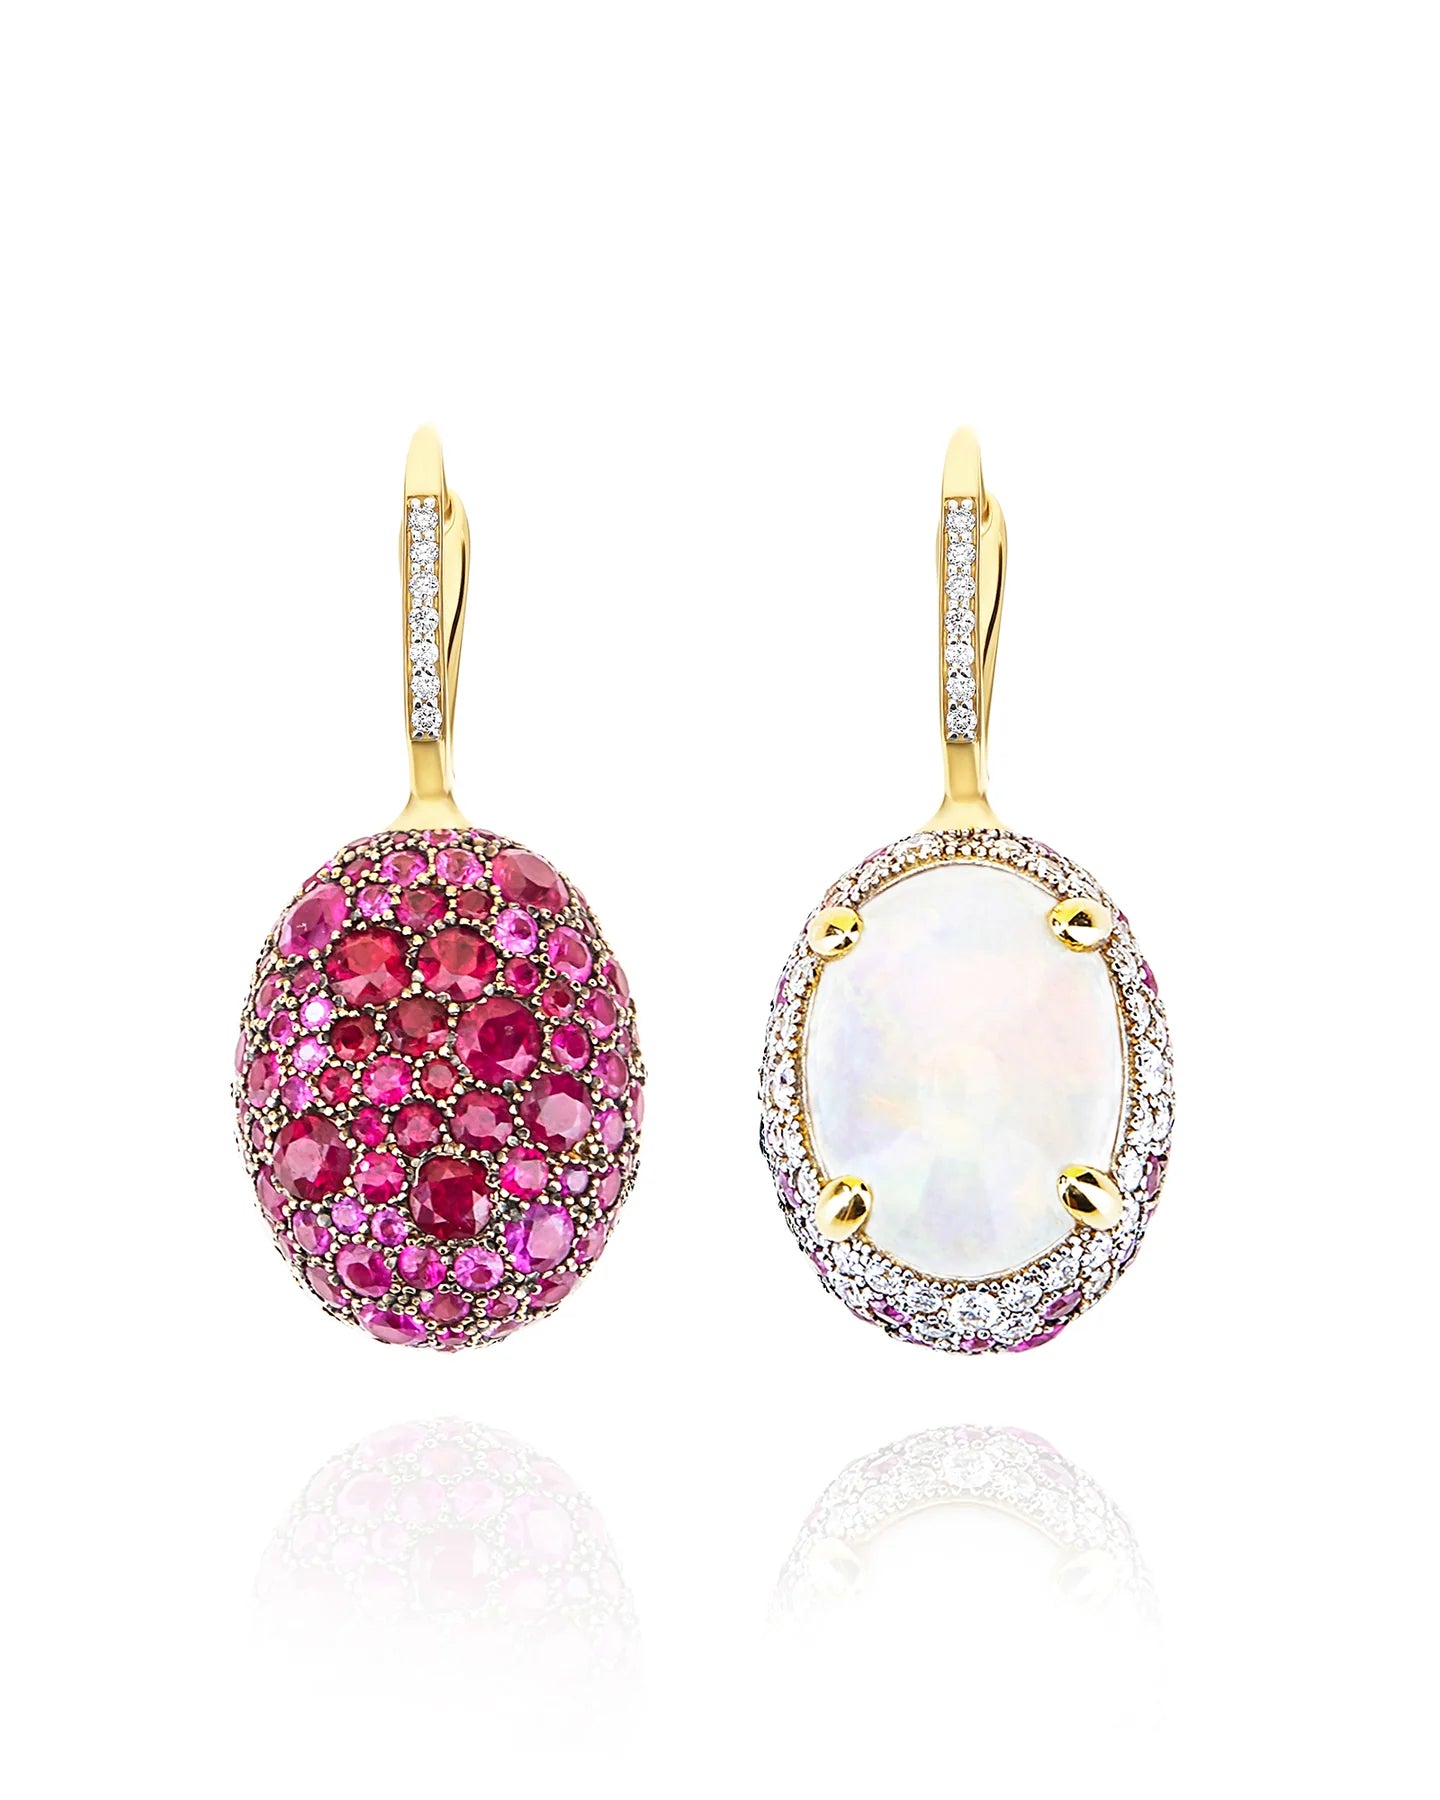 Nanis Reverse Gold, Pink Sapphires, Rubies, White Australian Opal and Diamonds Double Face Ball Drop Earrings (Large) - Orsini Jewellers